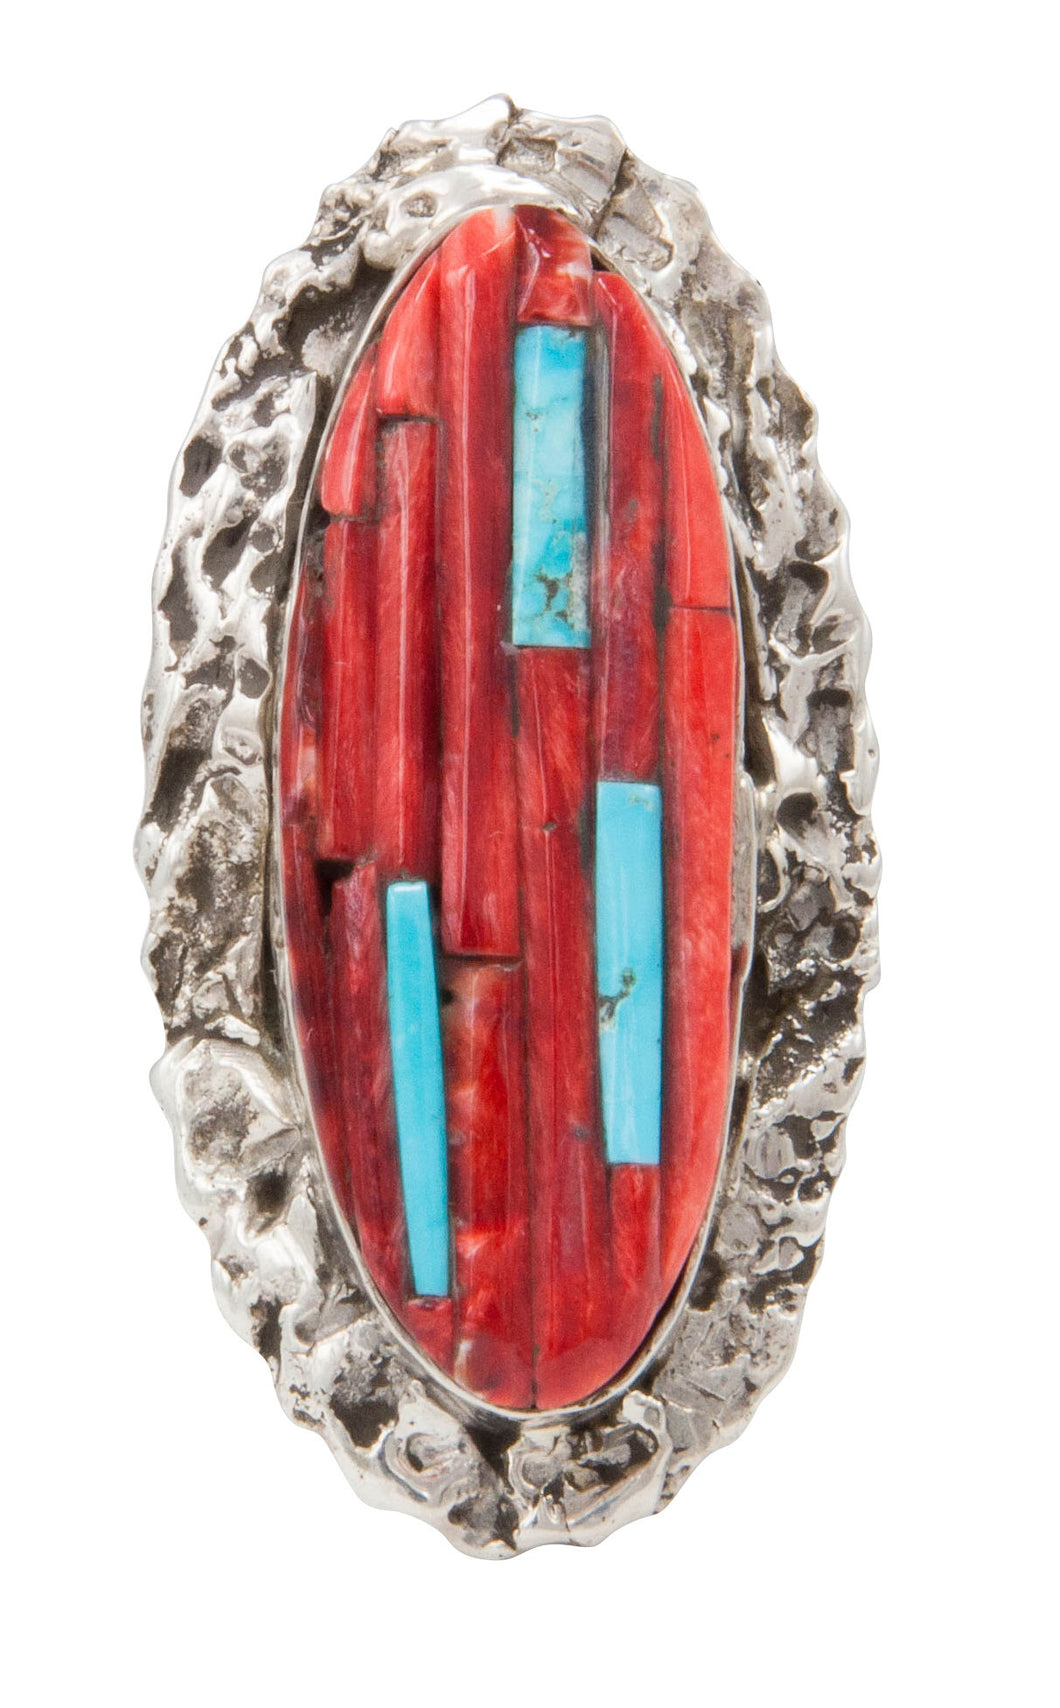 Navajo Native American Spiny Oyster and Turquoise Ring Size 6 1/4 by Clinton Pete SKU231362